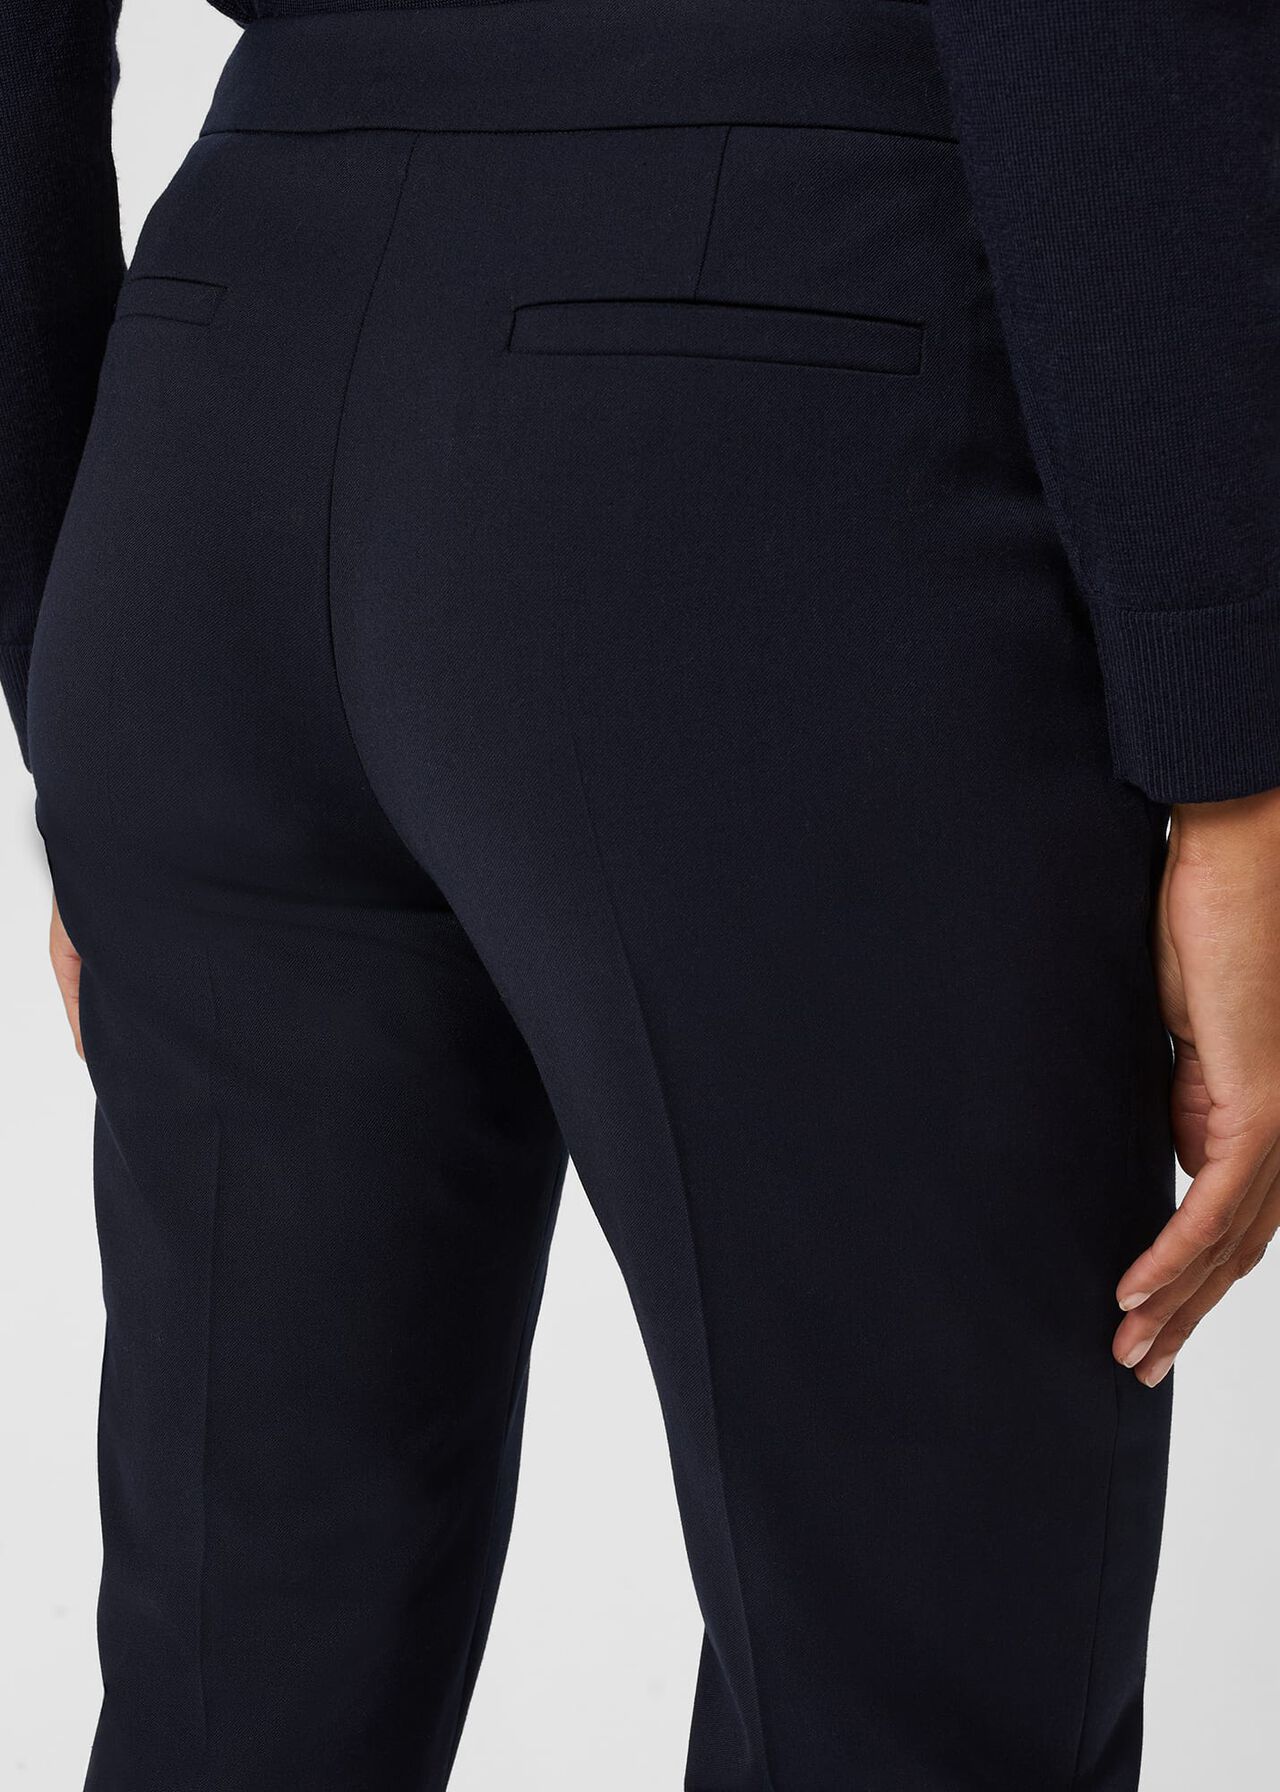 Hollie Trousers, Navy, hi-res